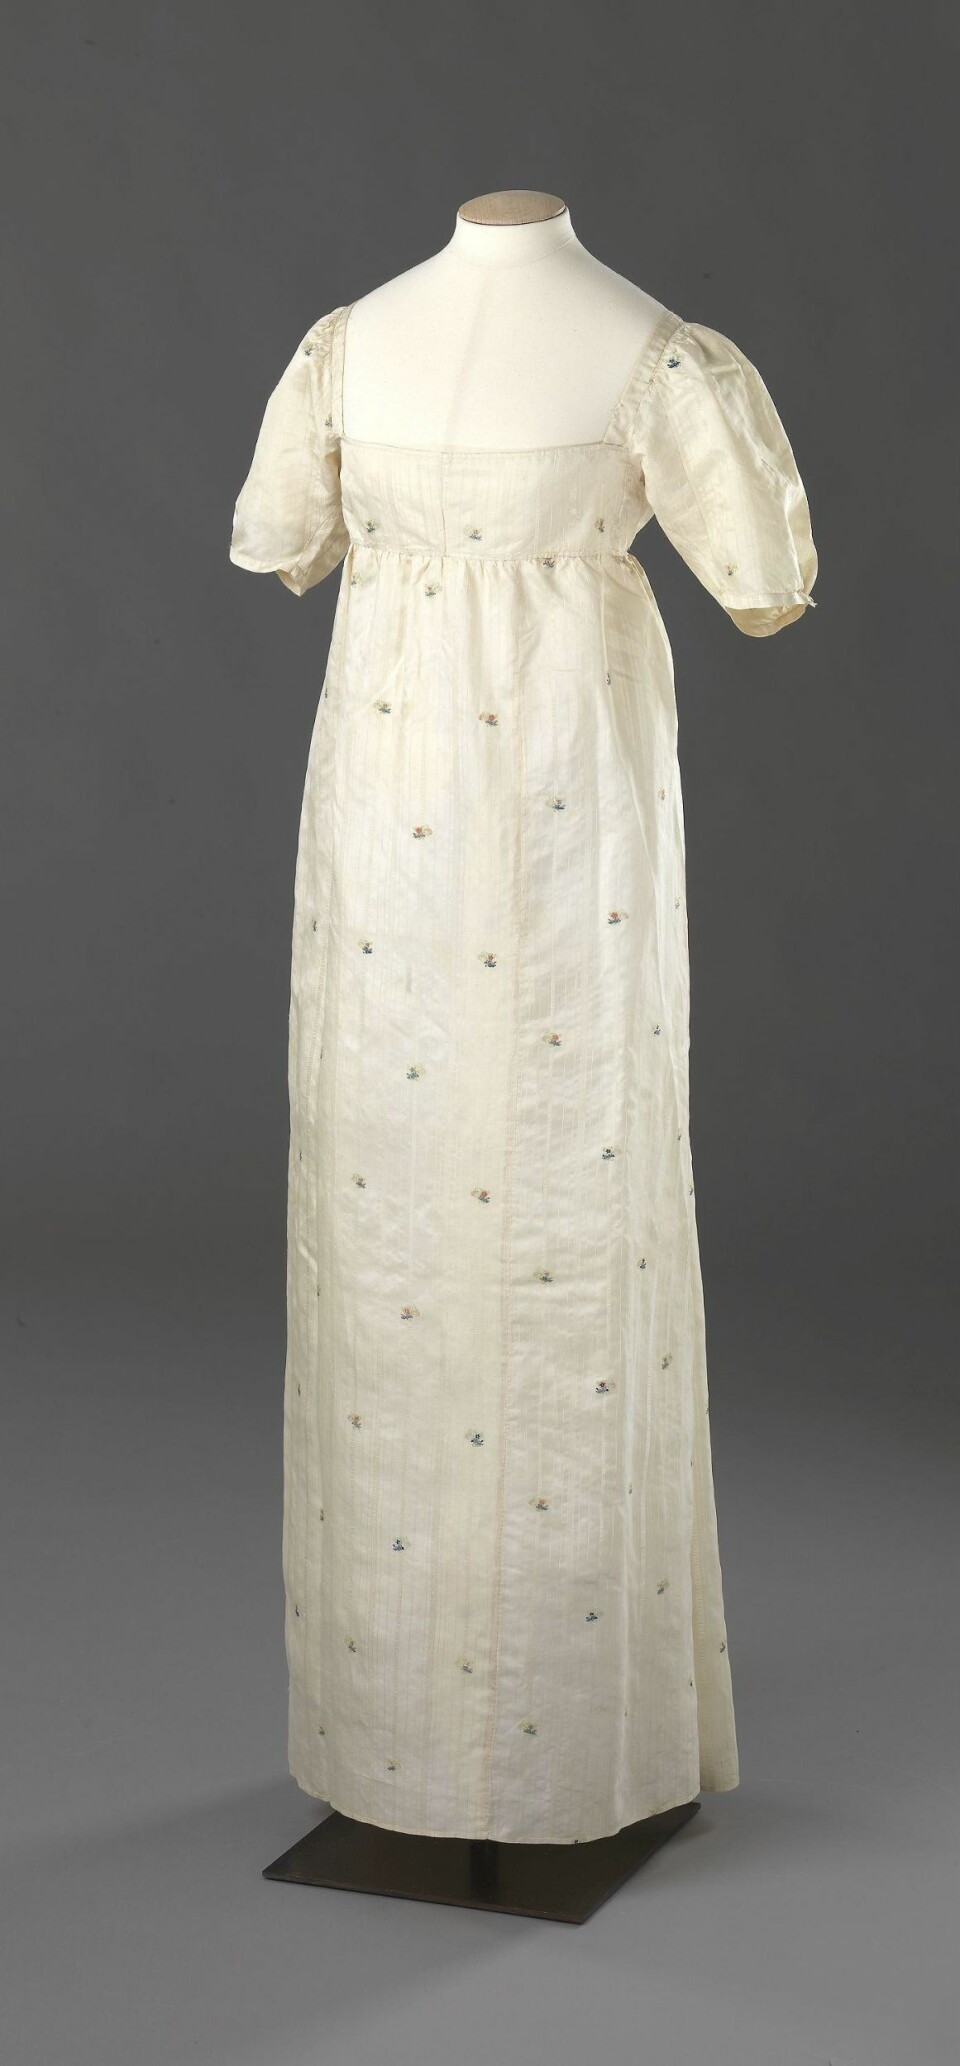 The dress is from around 1810 and is also made of silk. (Photo: National Museum of Art, Architecture and Design)